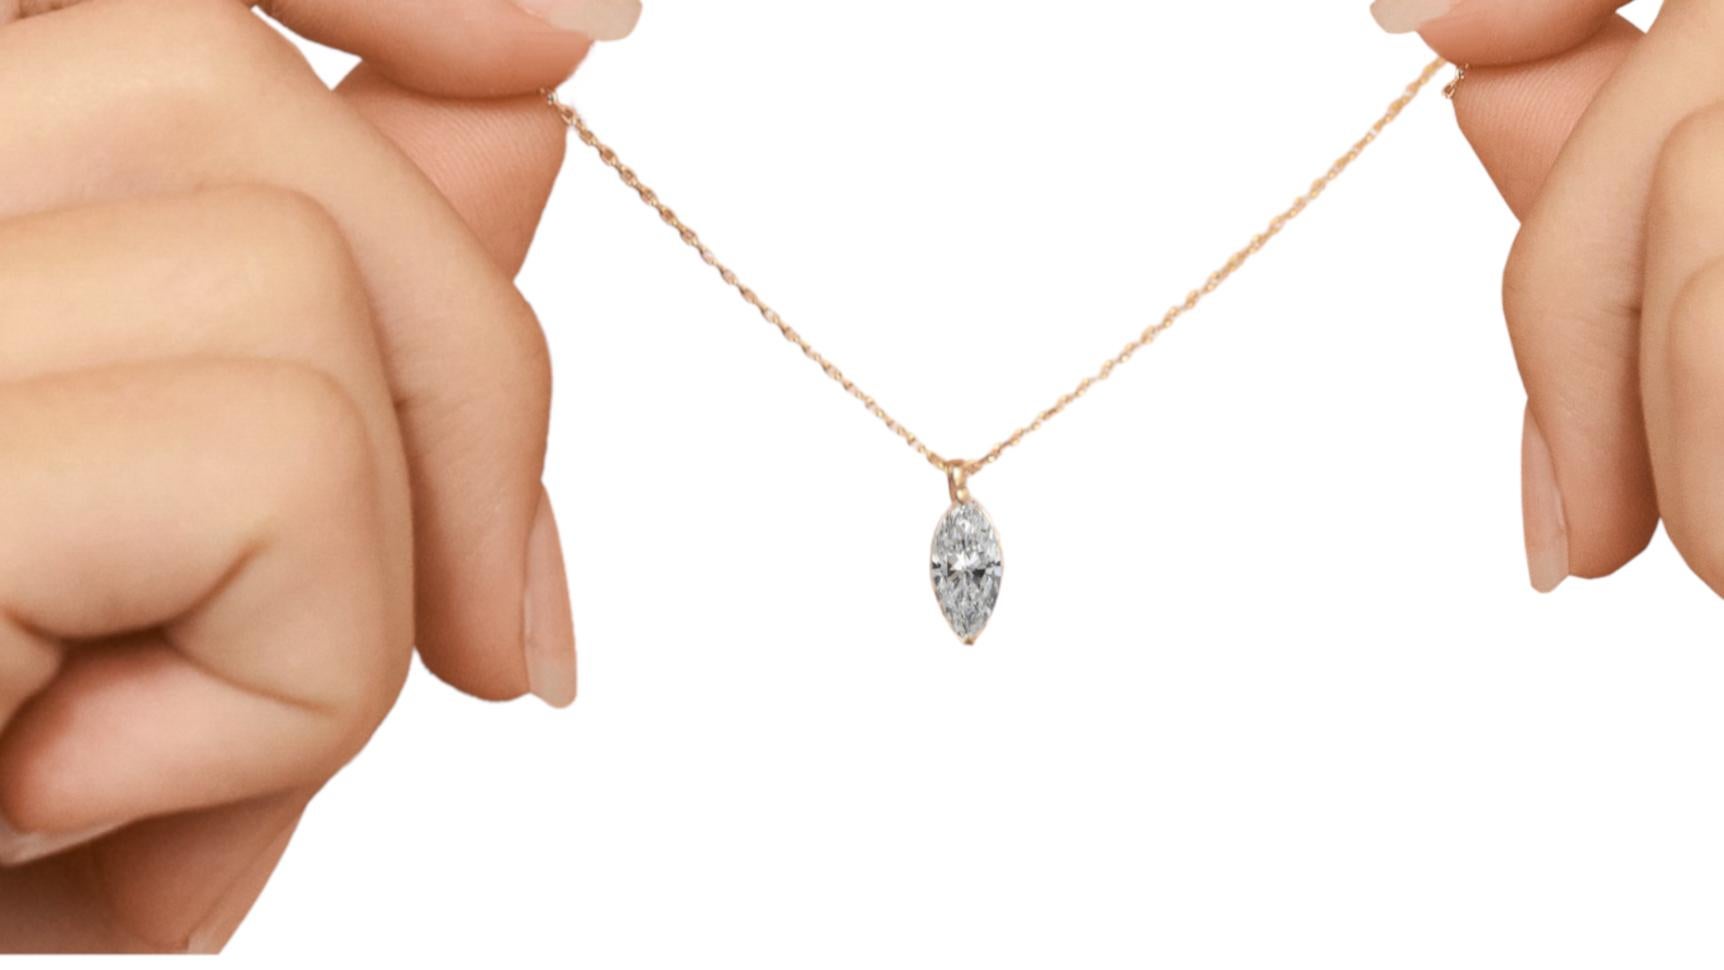 Fantastic solitaire pendant with 1.50 carat marquise cut diamond set in a 14Kt yellow gold setting and 14Kt yellow gold chain. 
The stone of the pendant is a marquise-cut diamond, an extremely refined cut that offers all its beauty set in a very